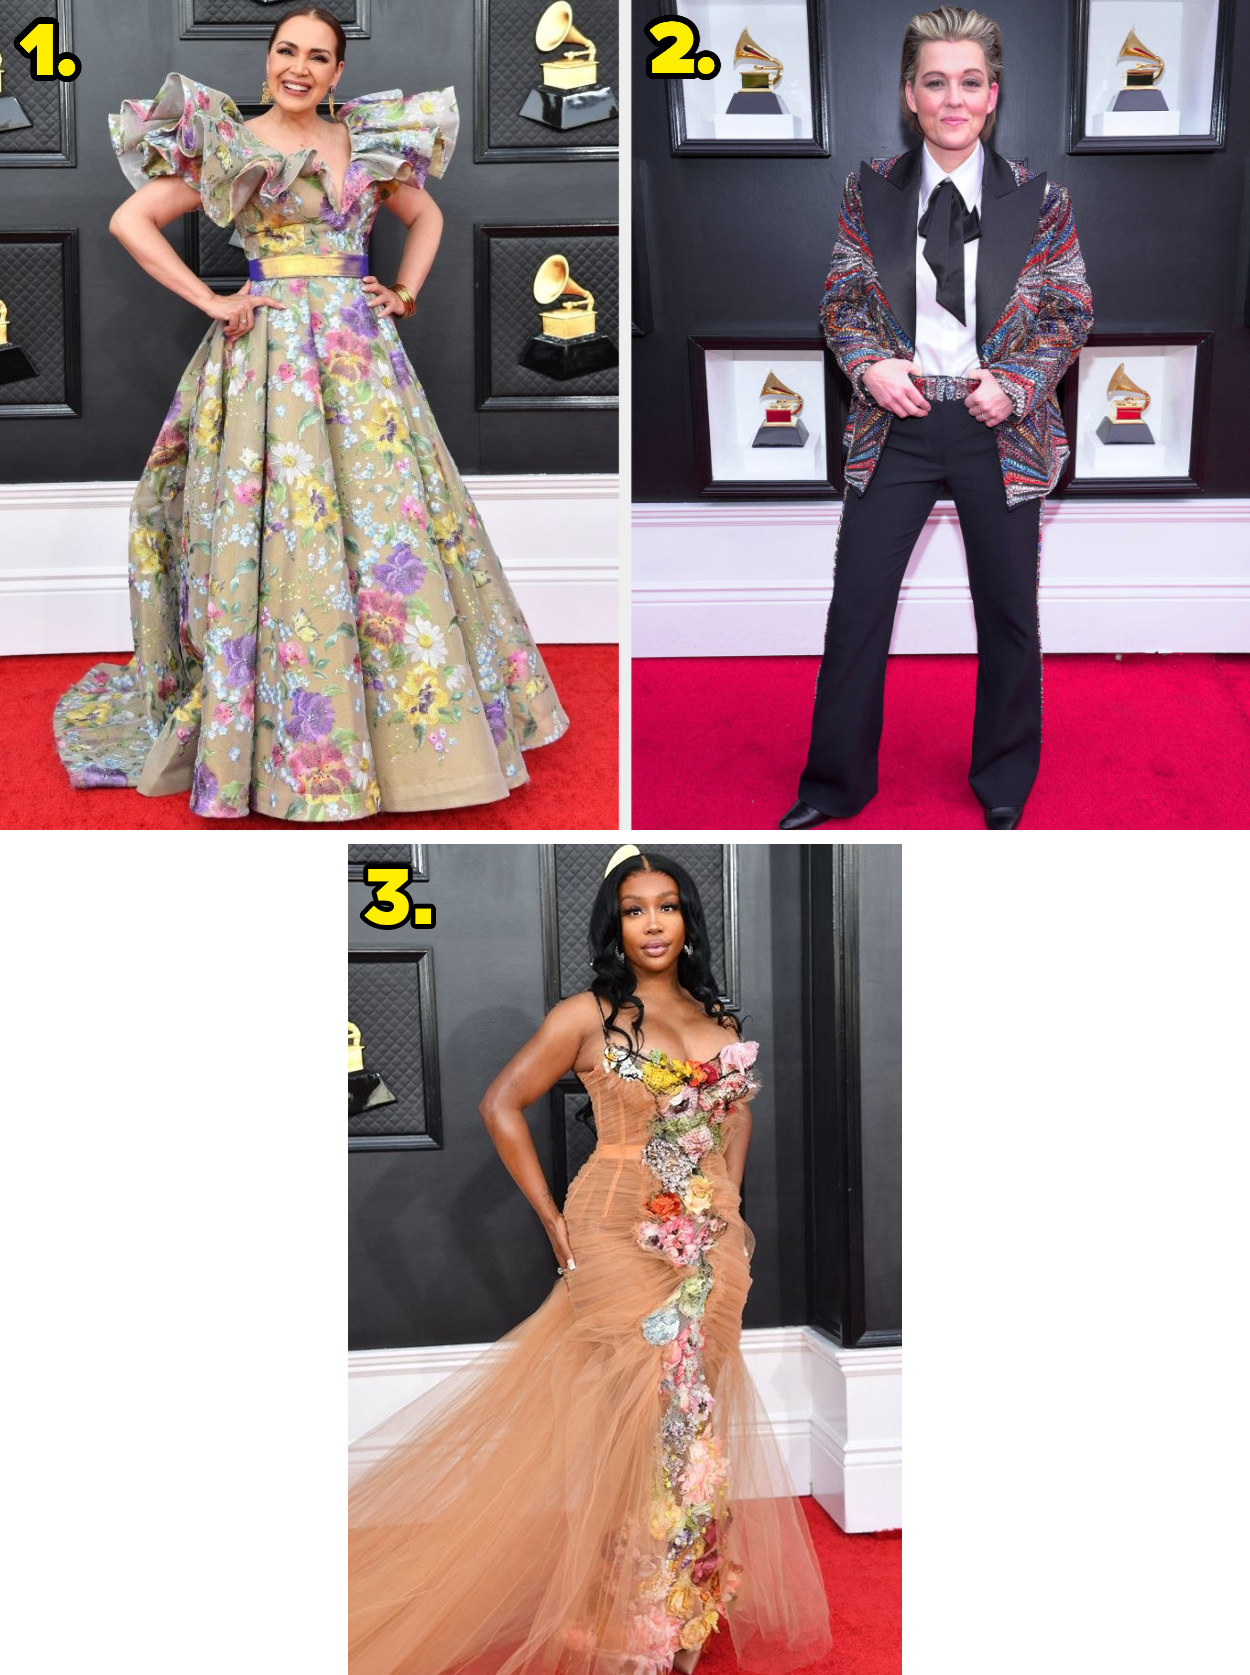 1. A floral printed ball gown with a giant ruffled neckline. 2. A suit jacket printed with several different colors and a collared shirt with a bow tied at the collar. 3. A nude colored tulle gown with flowers running all the way down the dress.